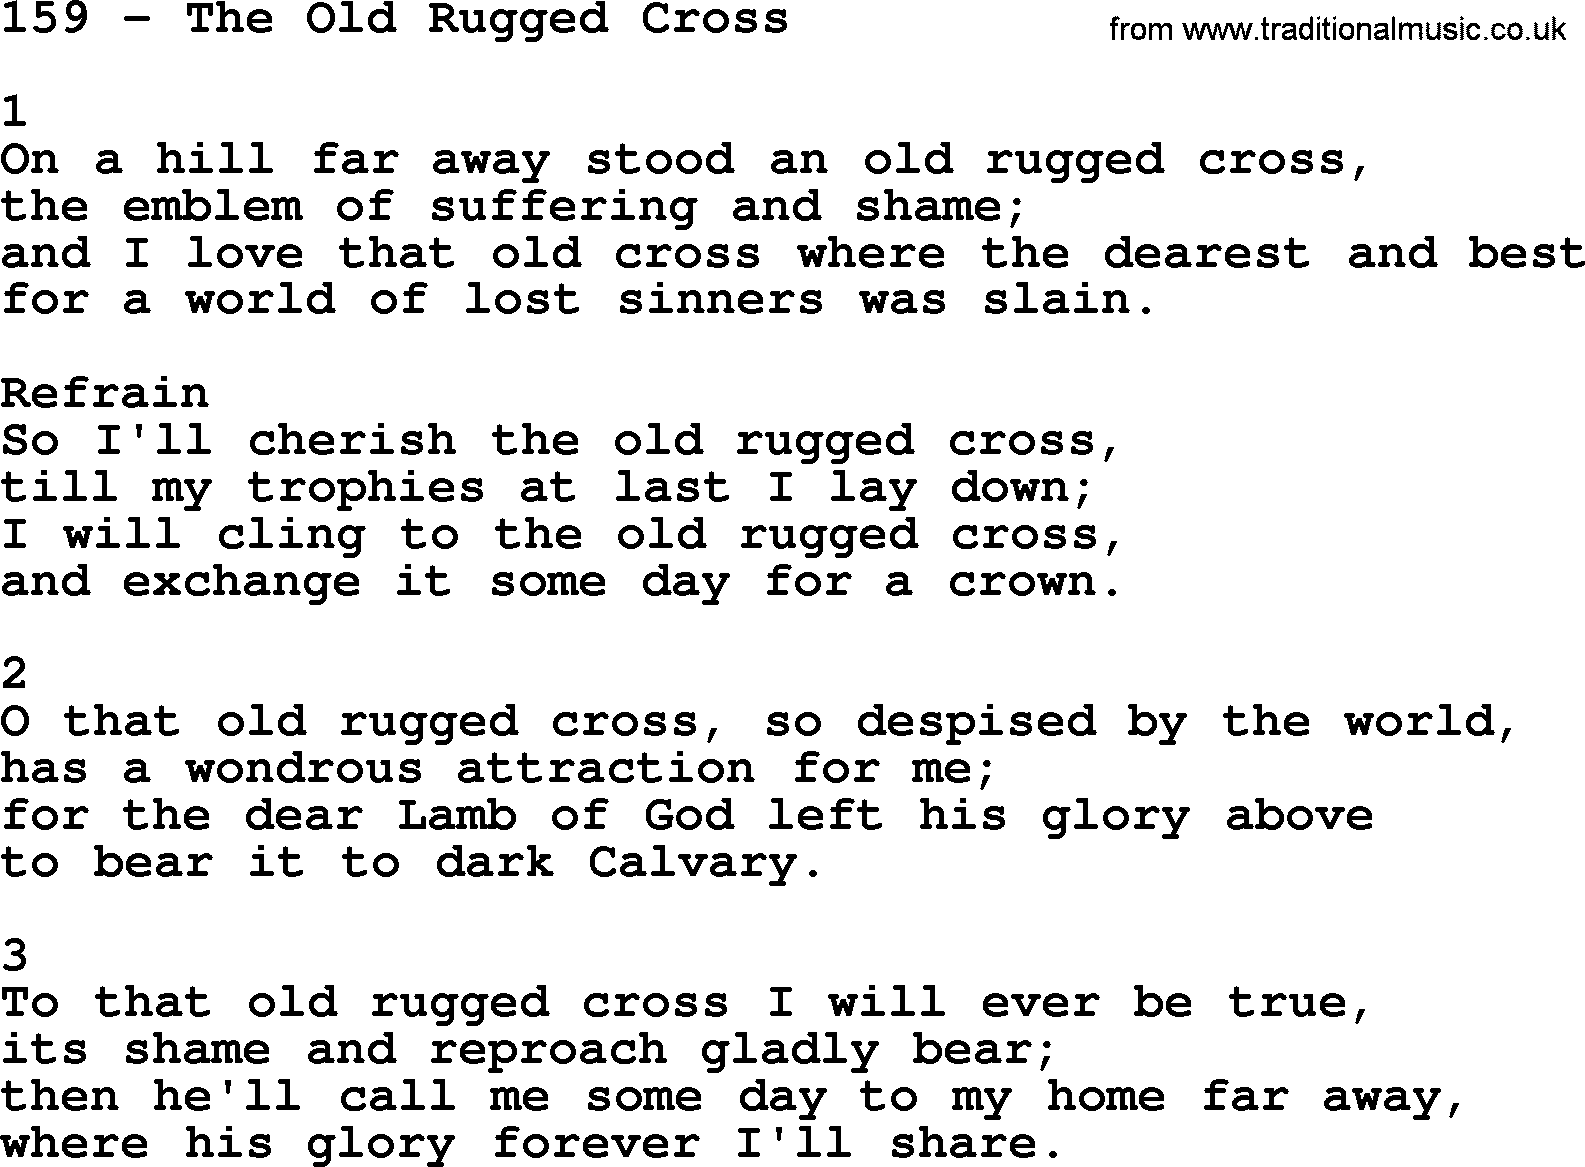 Complete Adventis Hymnal, title: 159-The Old Rugged Cross, with lyrics, midi, mp3, powerpoints(PPT) and PDF,